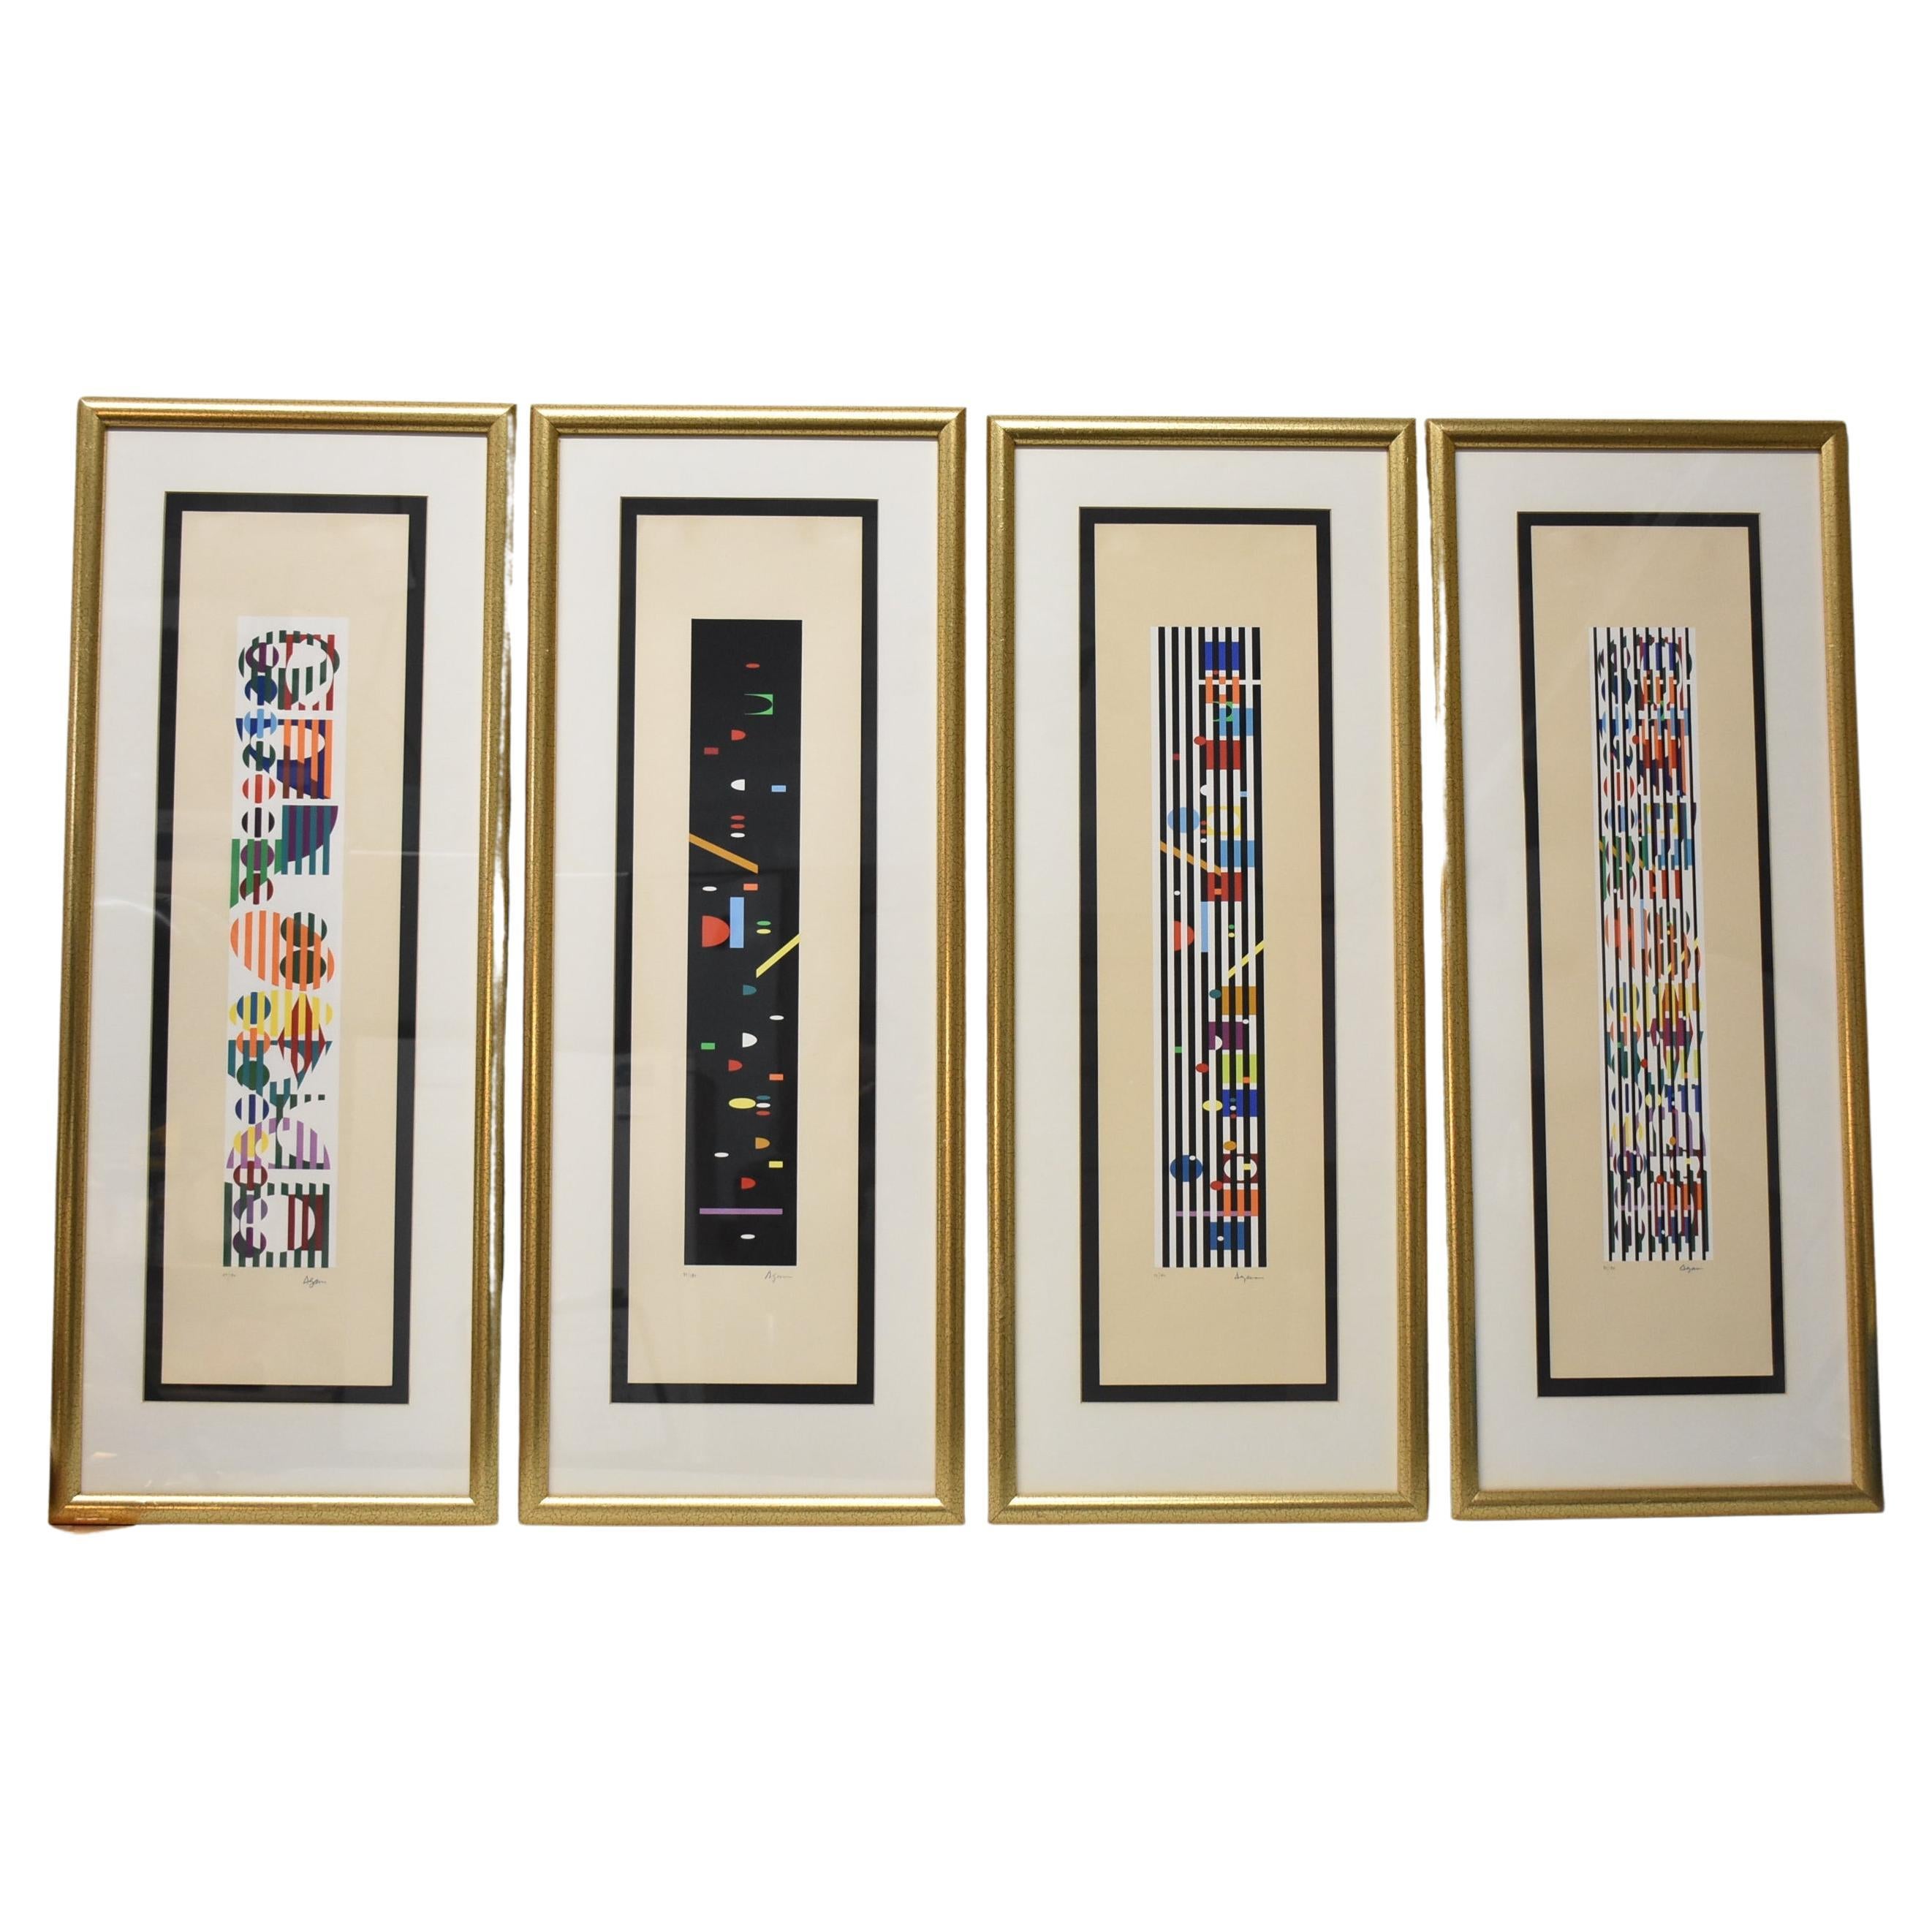 Four Limited Edition Prints By Yaacov Agam 89 / 180 For Sale